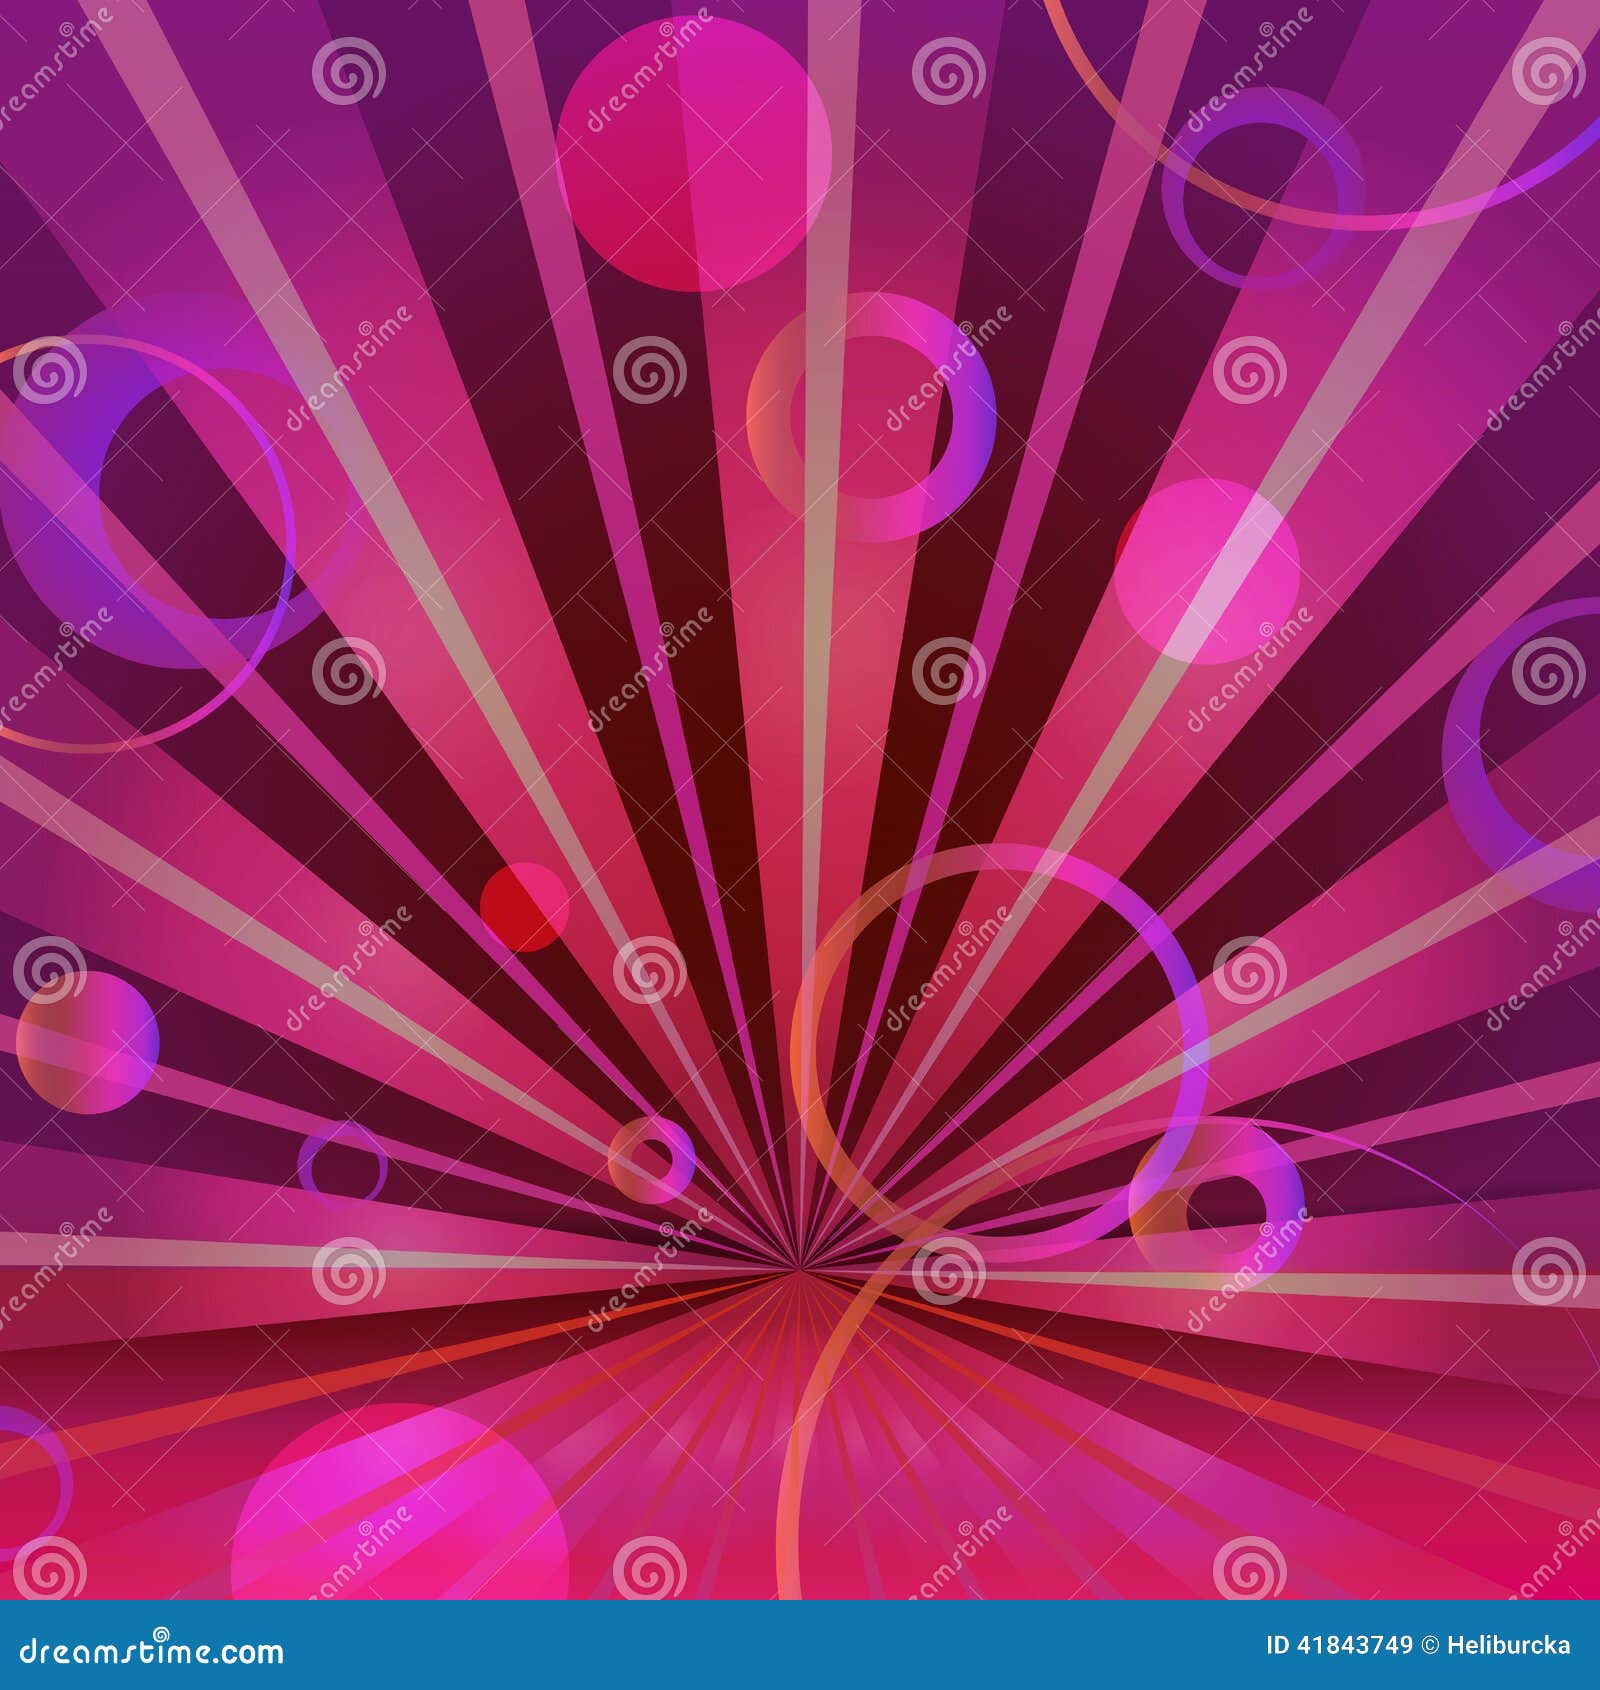 Abstract Burgundy Background With Circles And Stock Vector